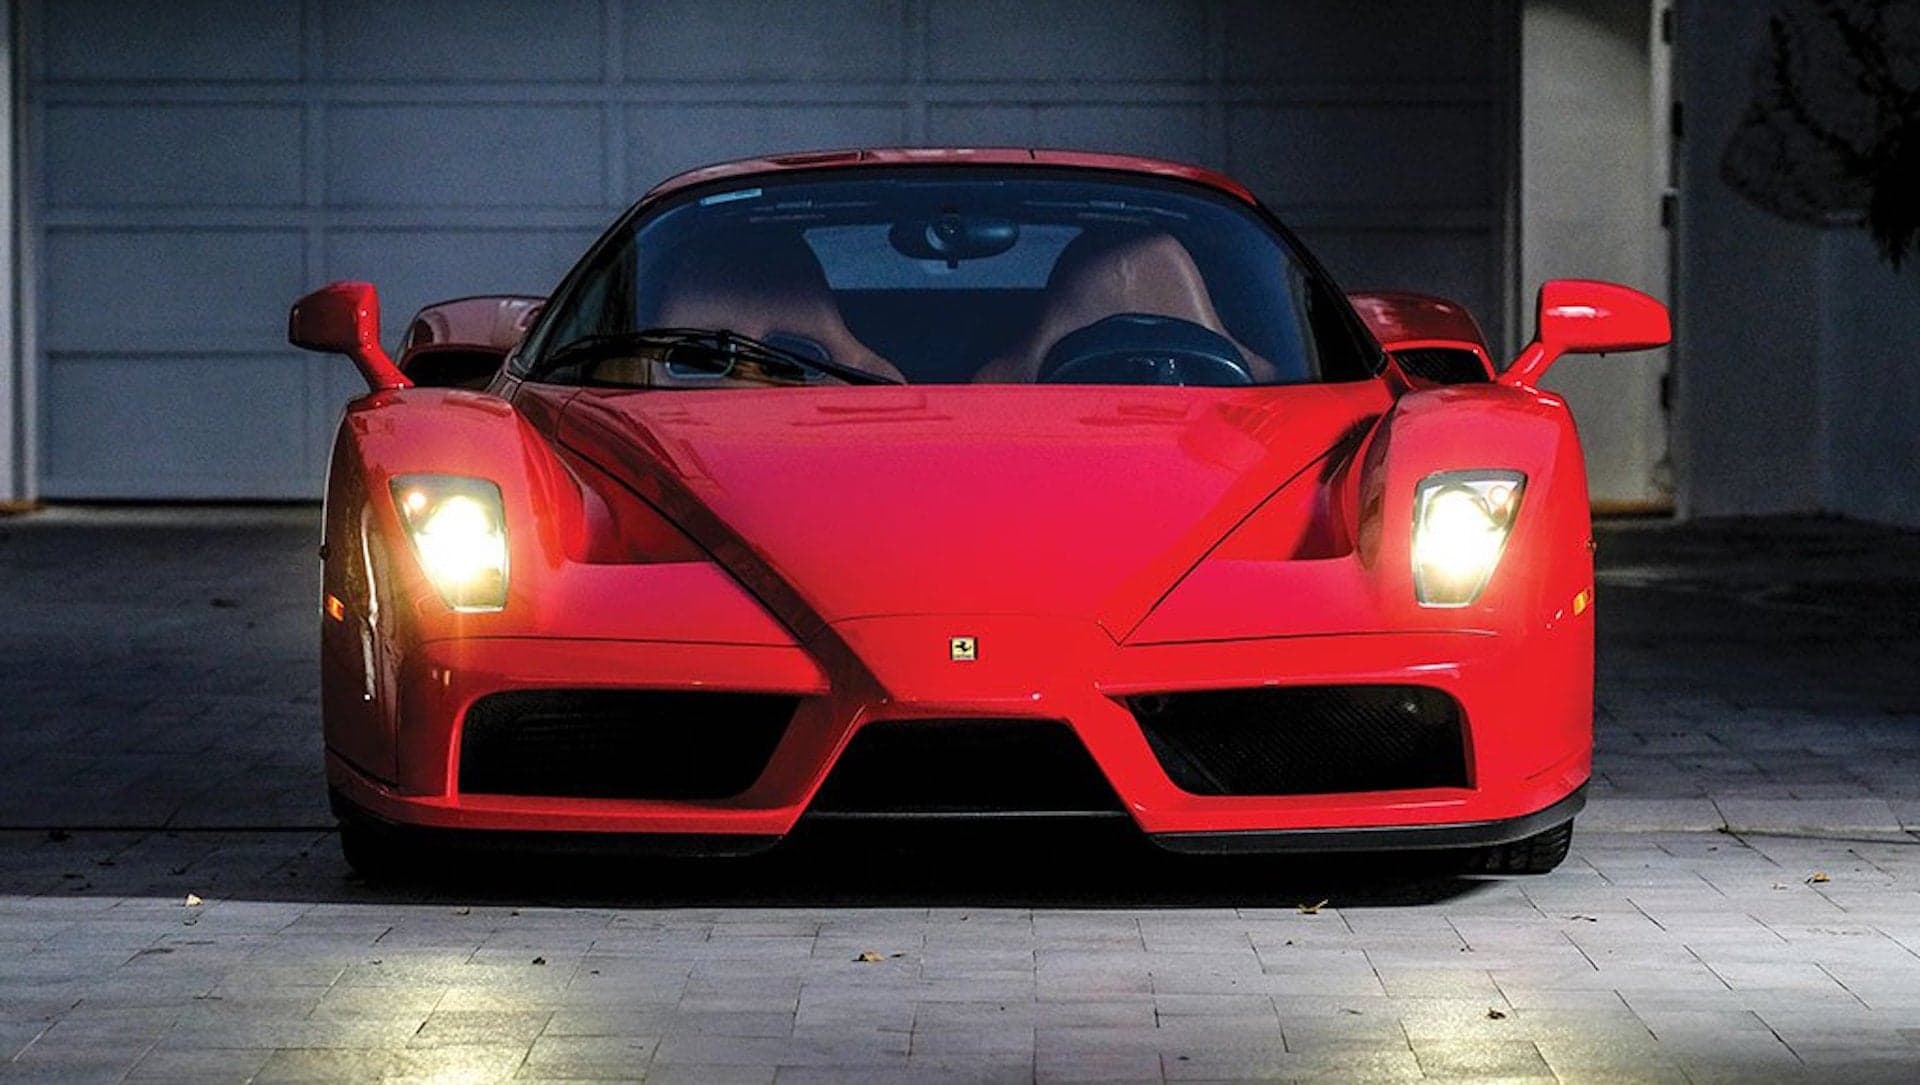 Tommy Hilfiger’s Flawless Ferrari Enzo Is For Sale